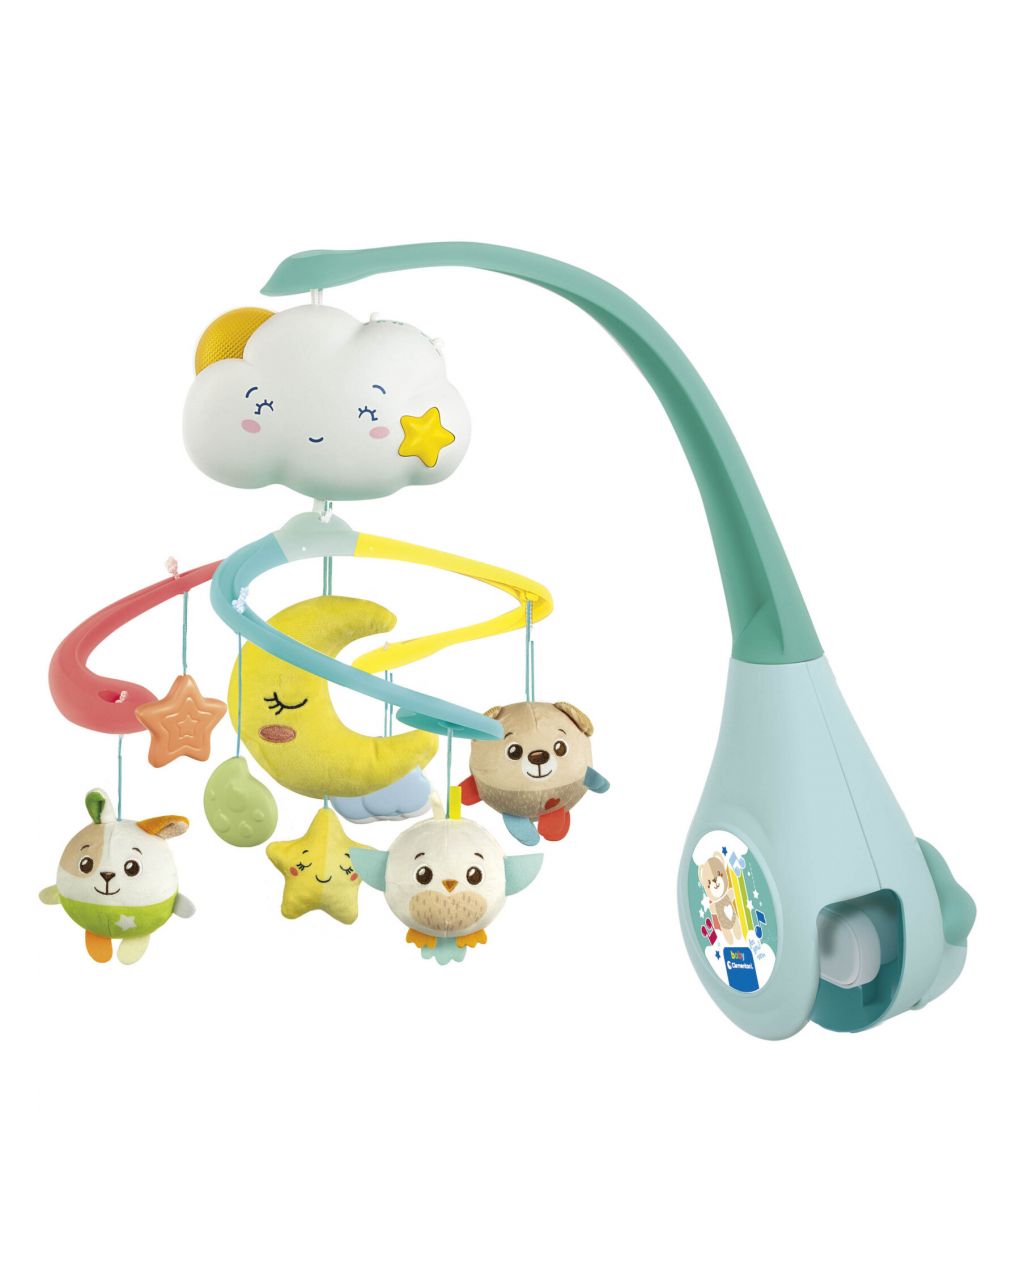 Baby clementoni - sweet and dream cot mobile giostrina culla o lettino - Baby Clementoni